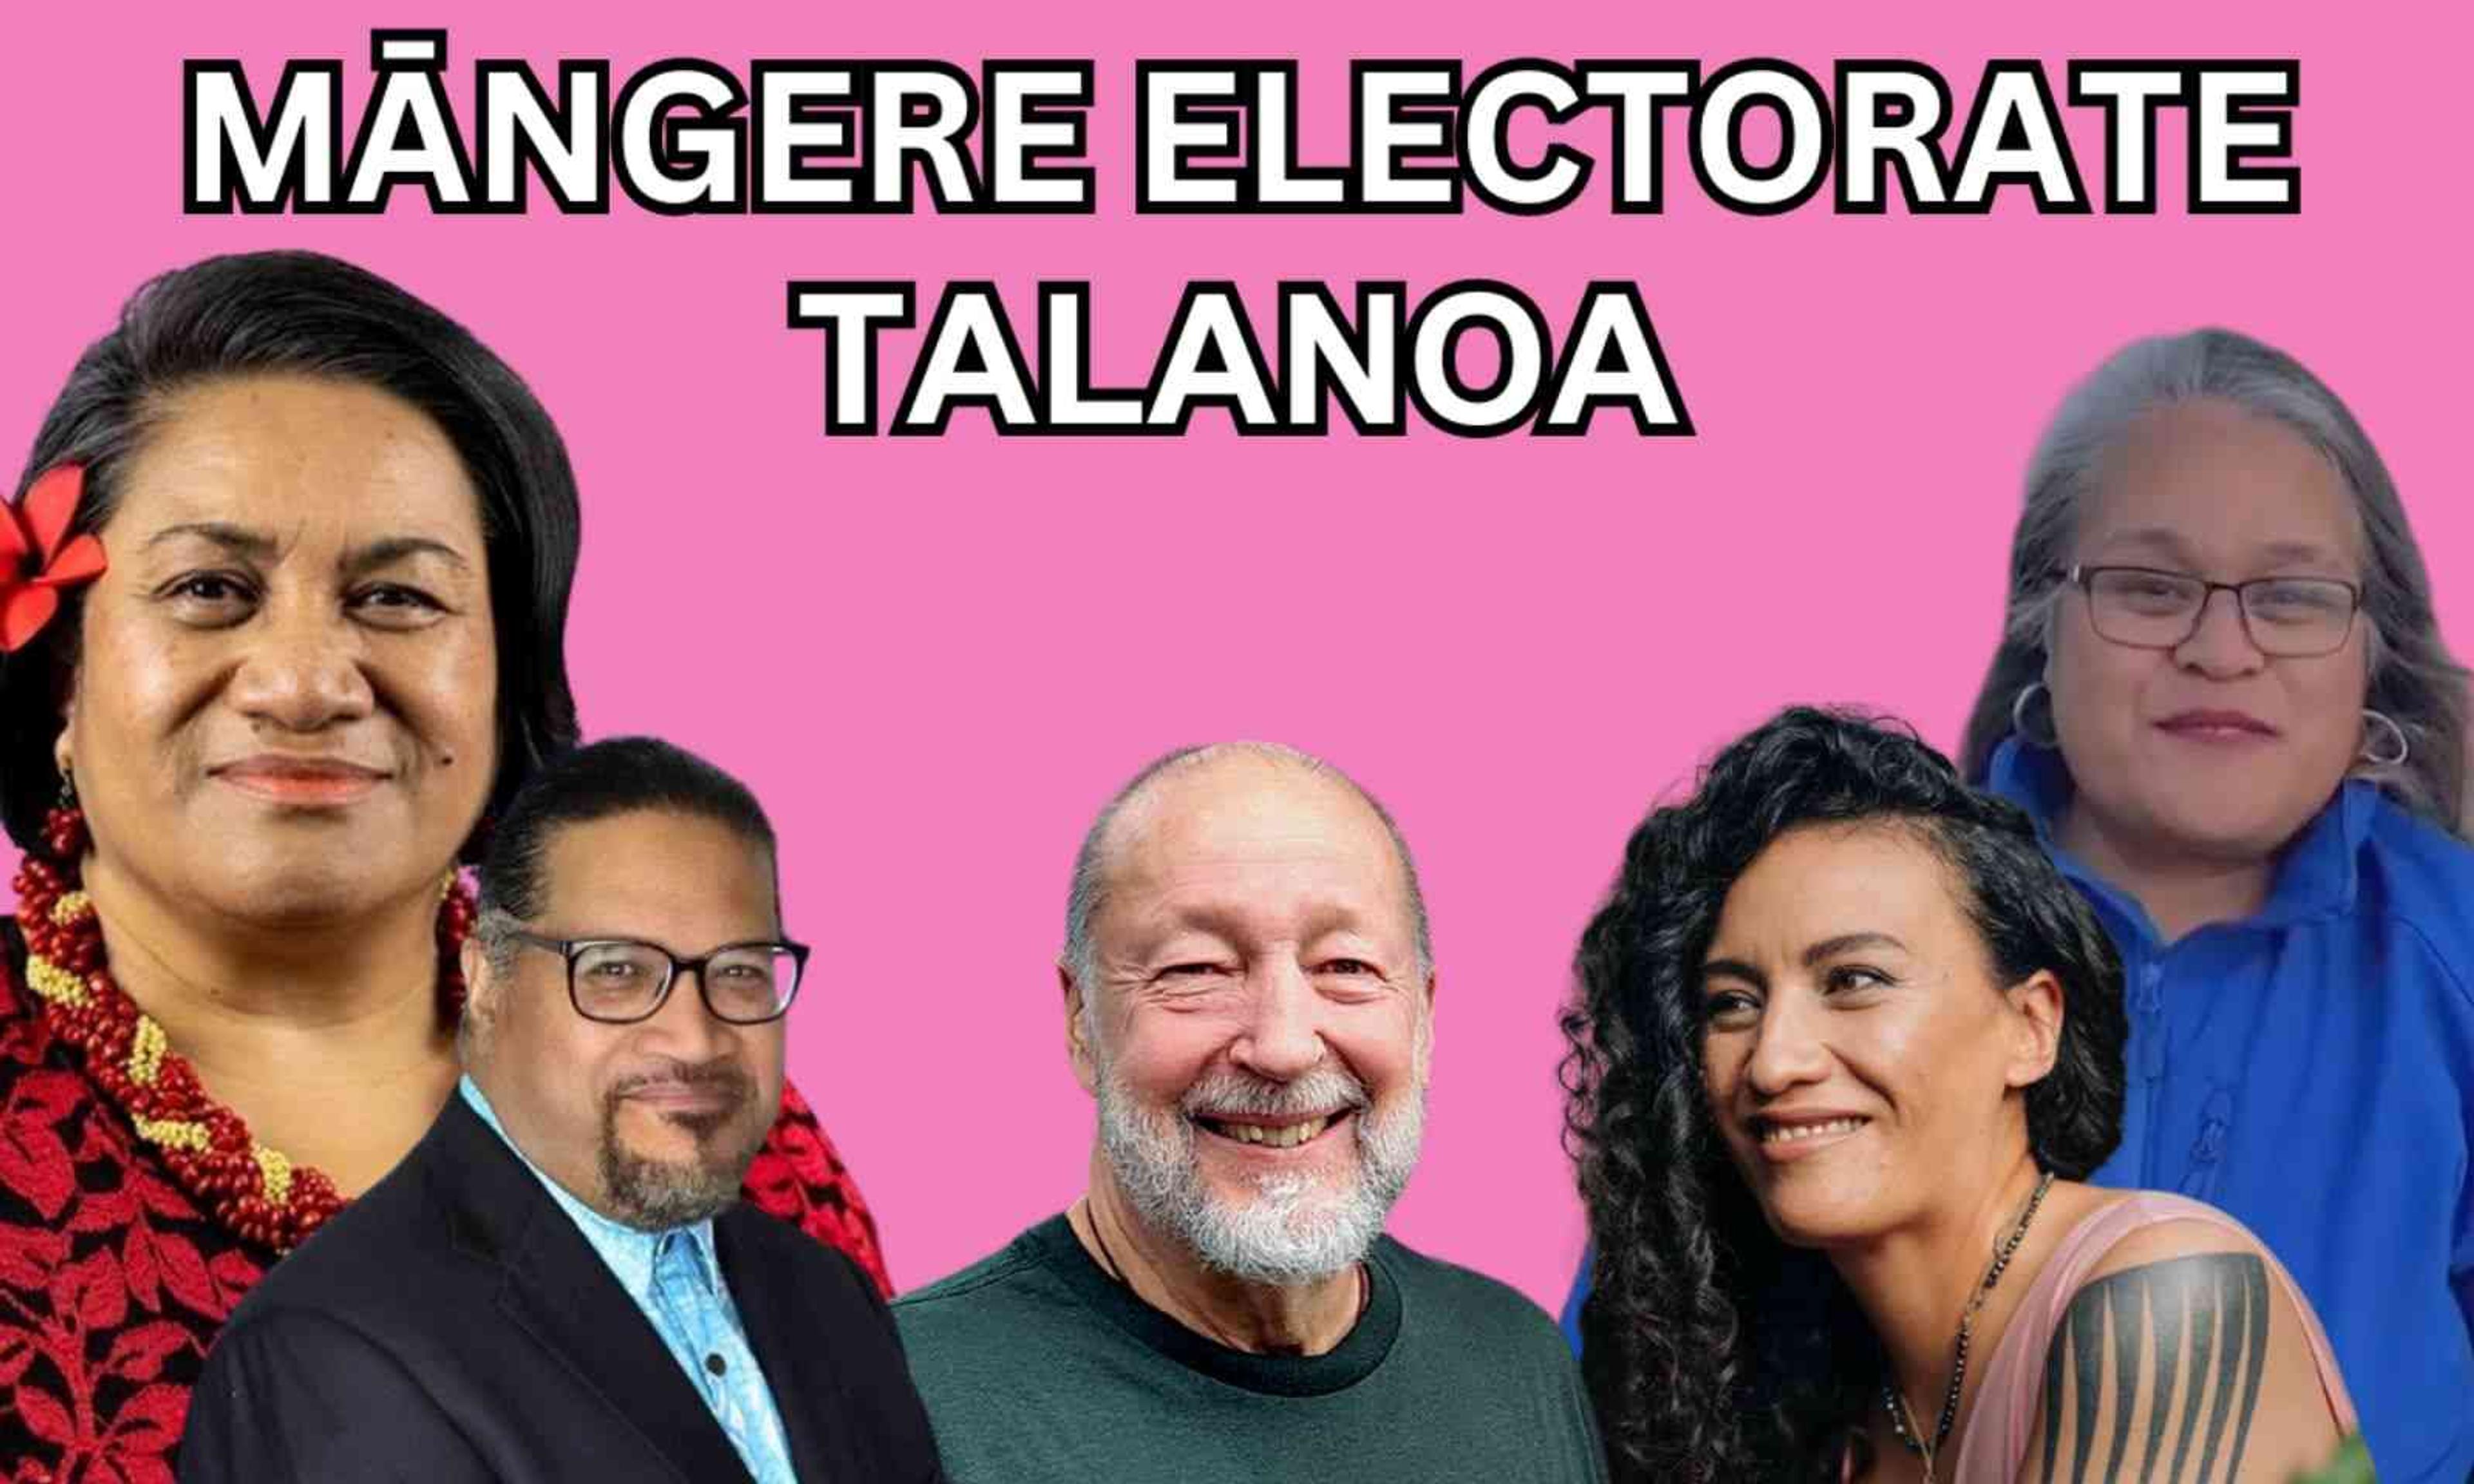 531pi's Pacific Days hosted a Māngere Electorate Talanoa for the main candidates running. 